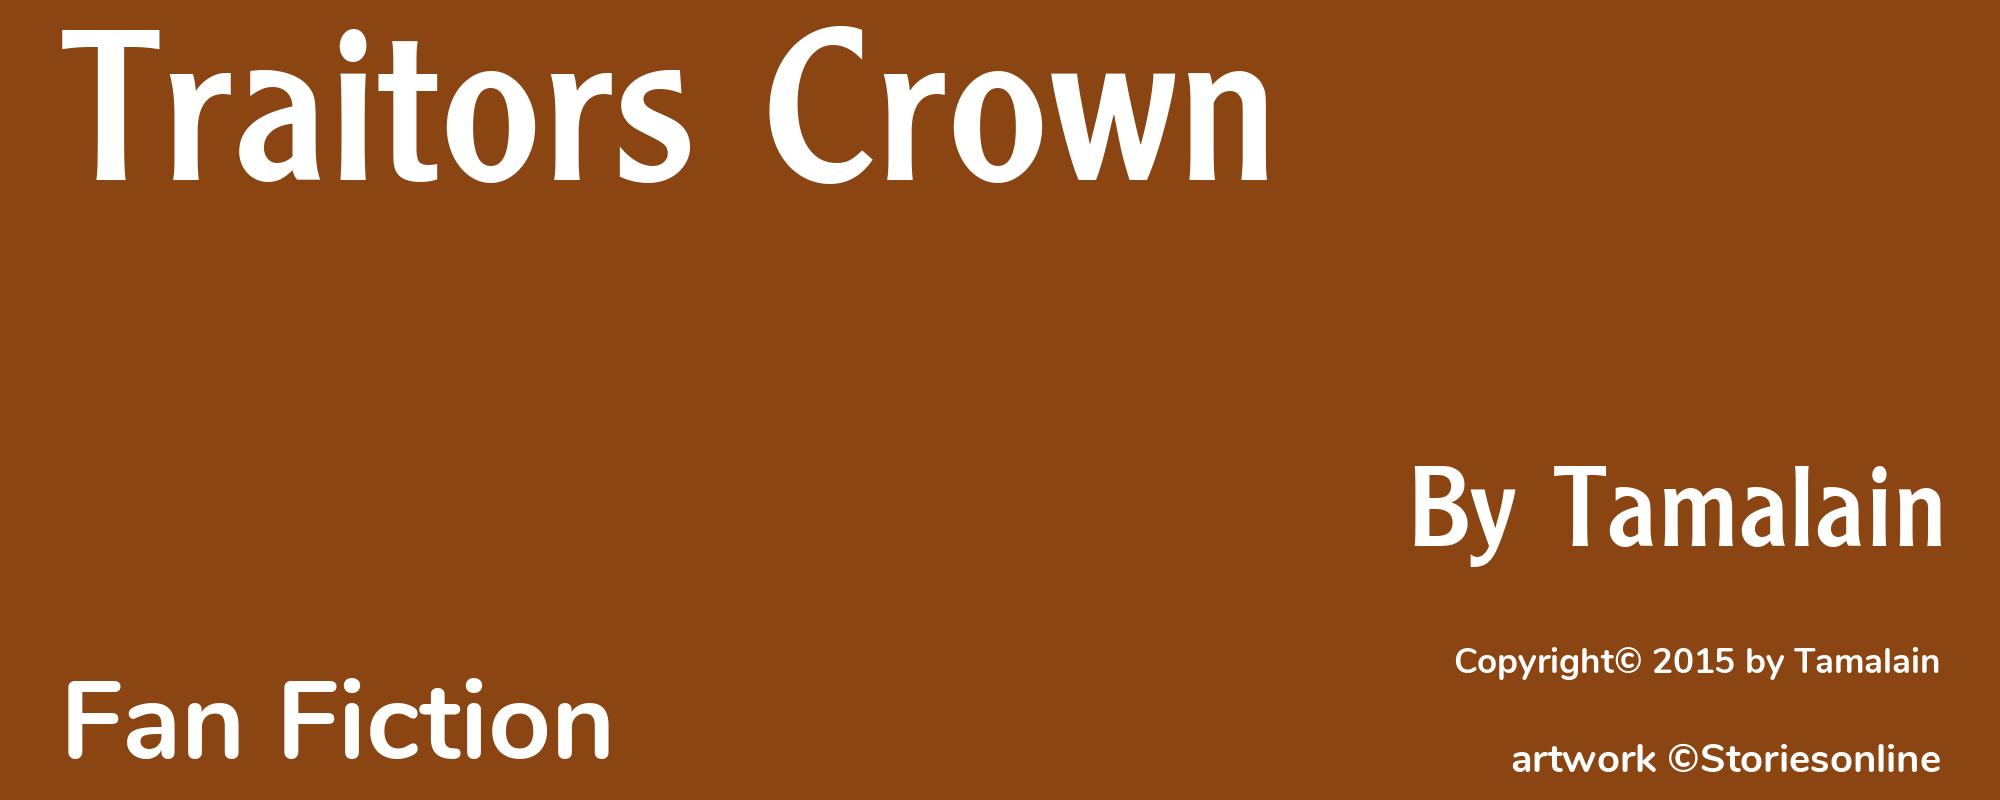 Traitors Crown - Cover